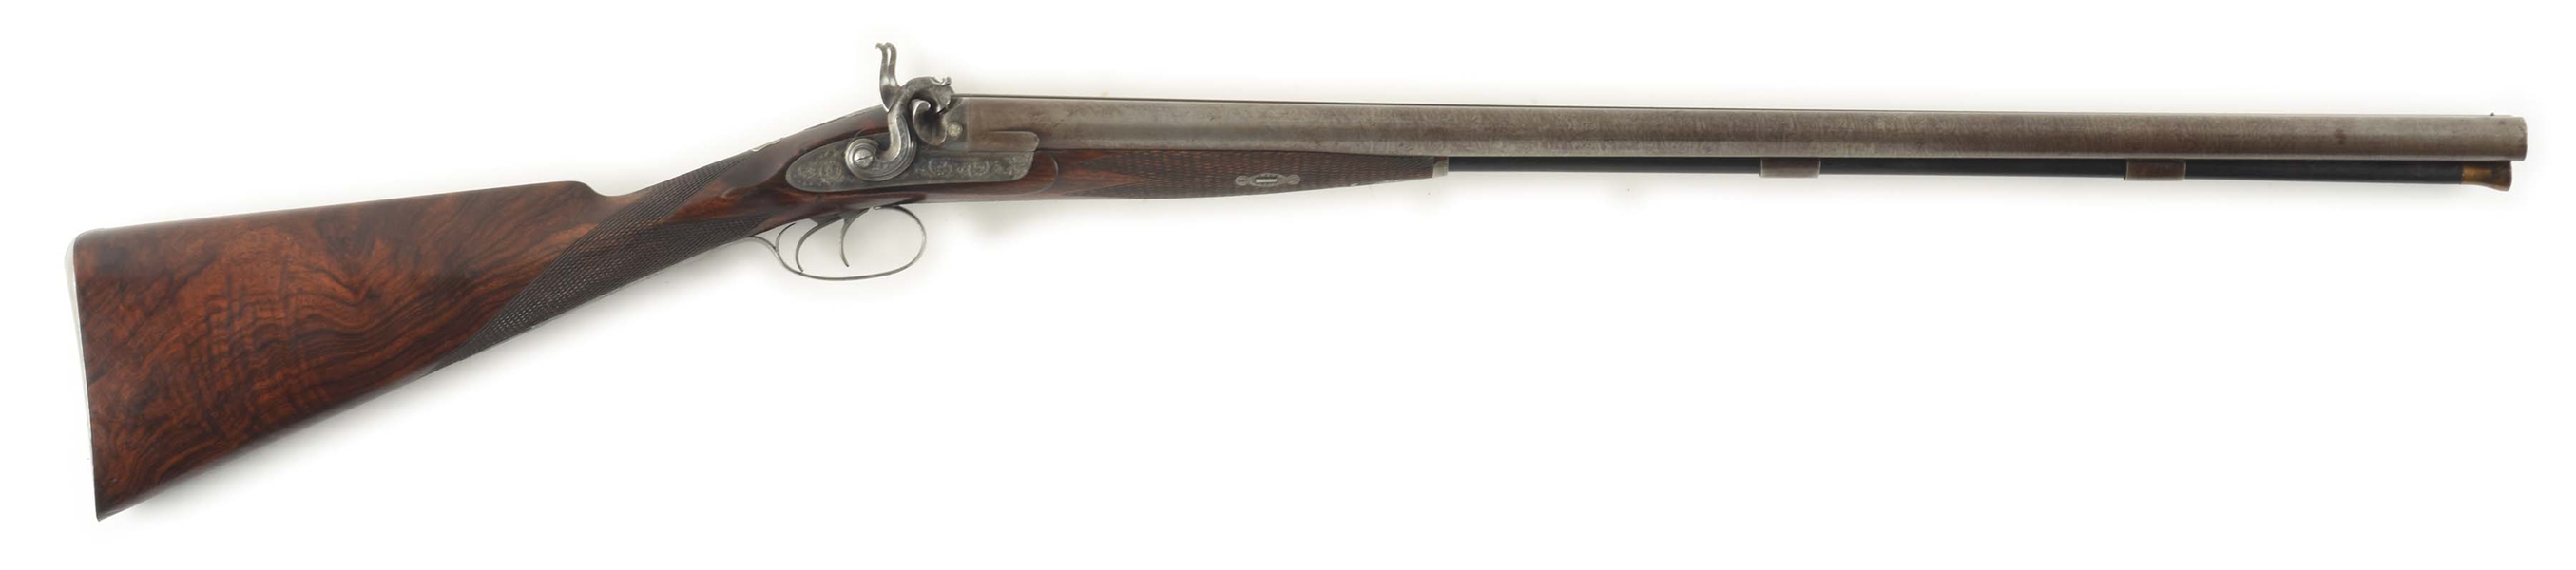 (A) HIGH GRADE LATE BUILT W. W. GREENER 10 GAUGE PERCUSSION SIDE BY SIDE SHOTGUN.